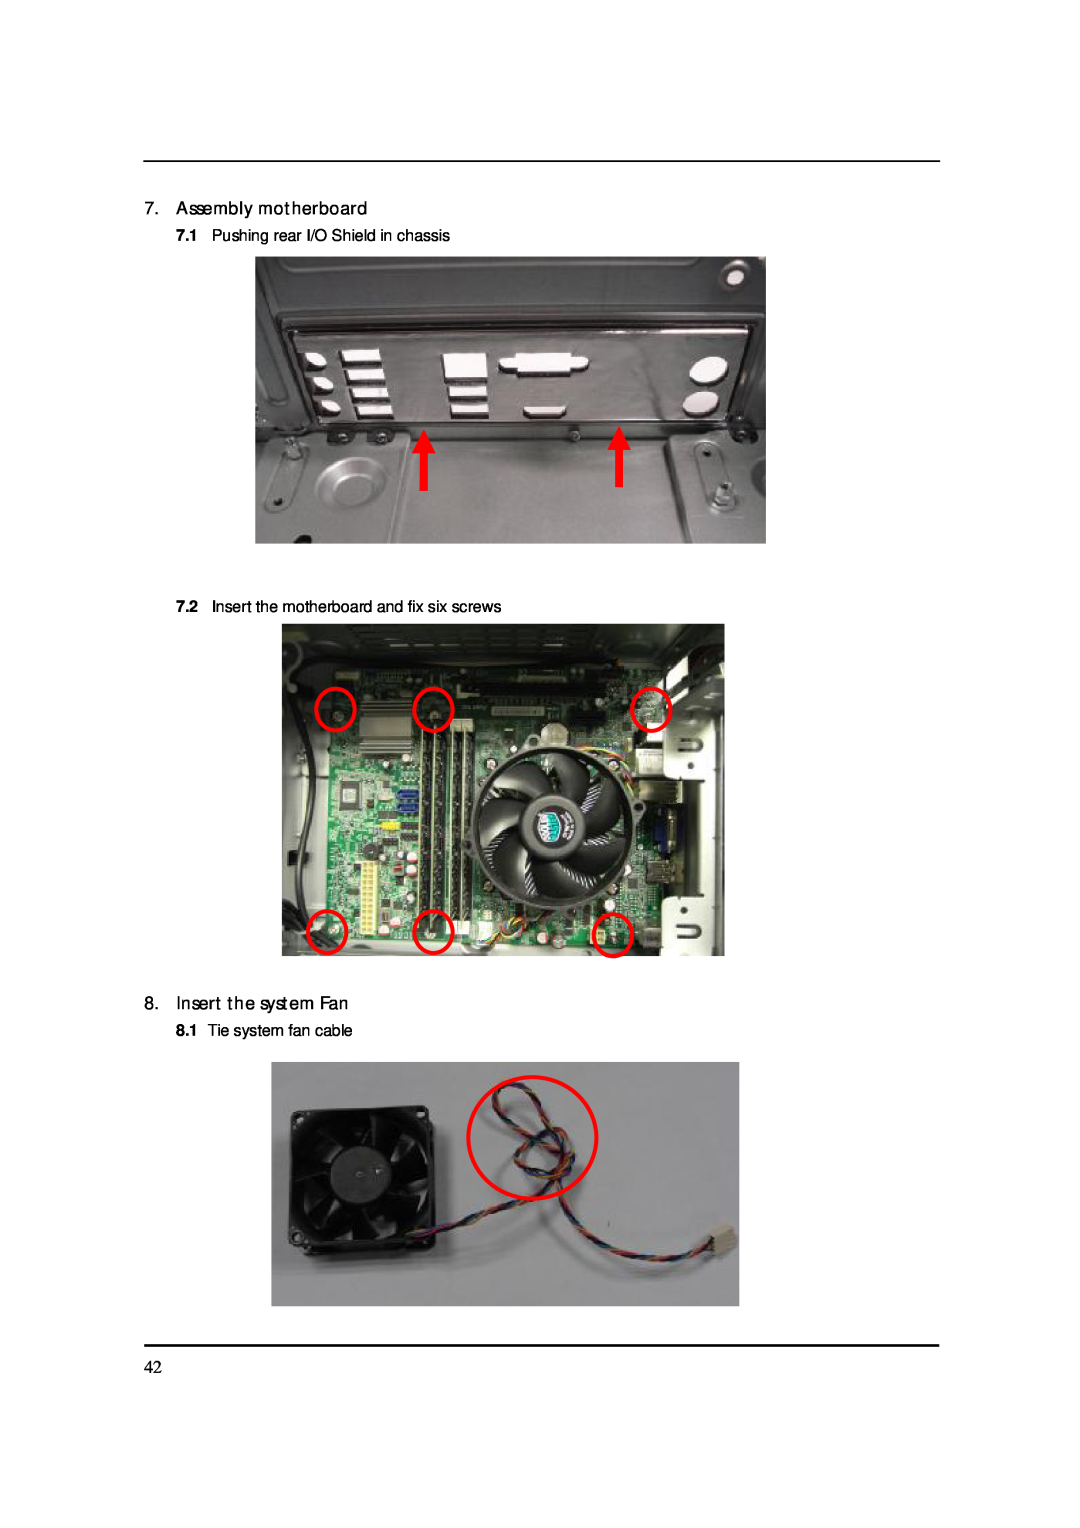 Acer S3811 manual Assembly motherboard, Insert the system Fan, Pushing rear I/O Shield in chassis, Tie system fan cable 